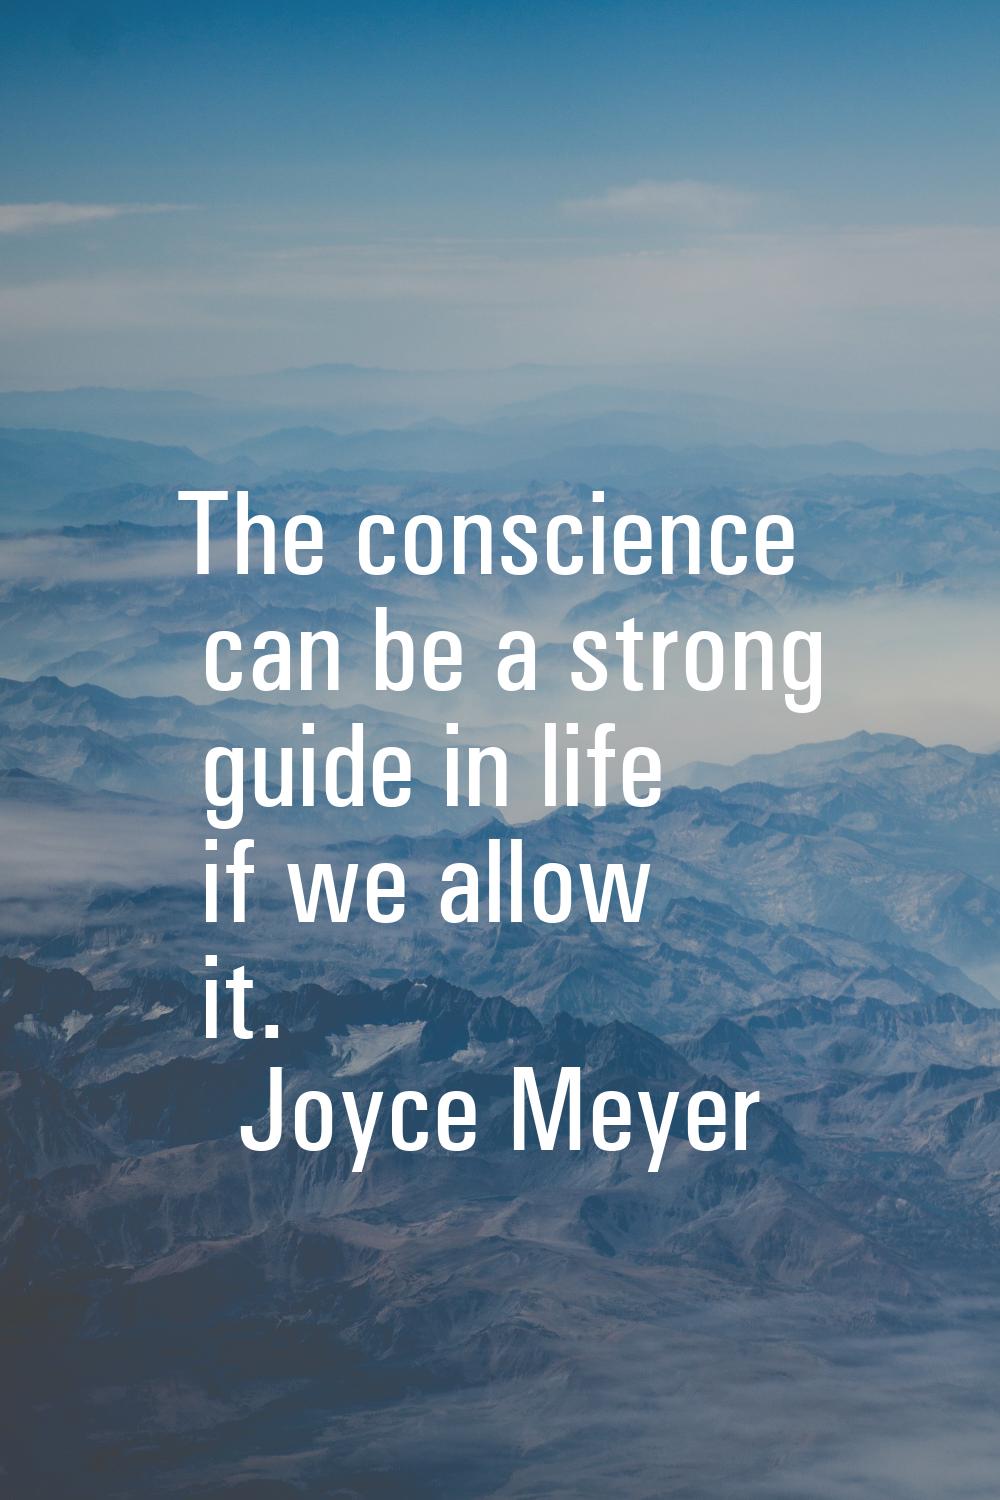 The conscience can be a strong guide in life if we allow it.